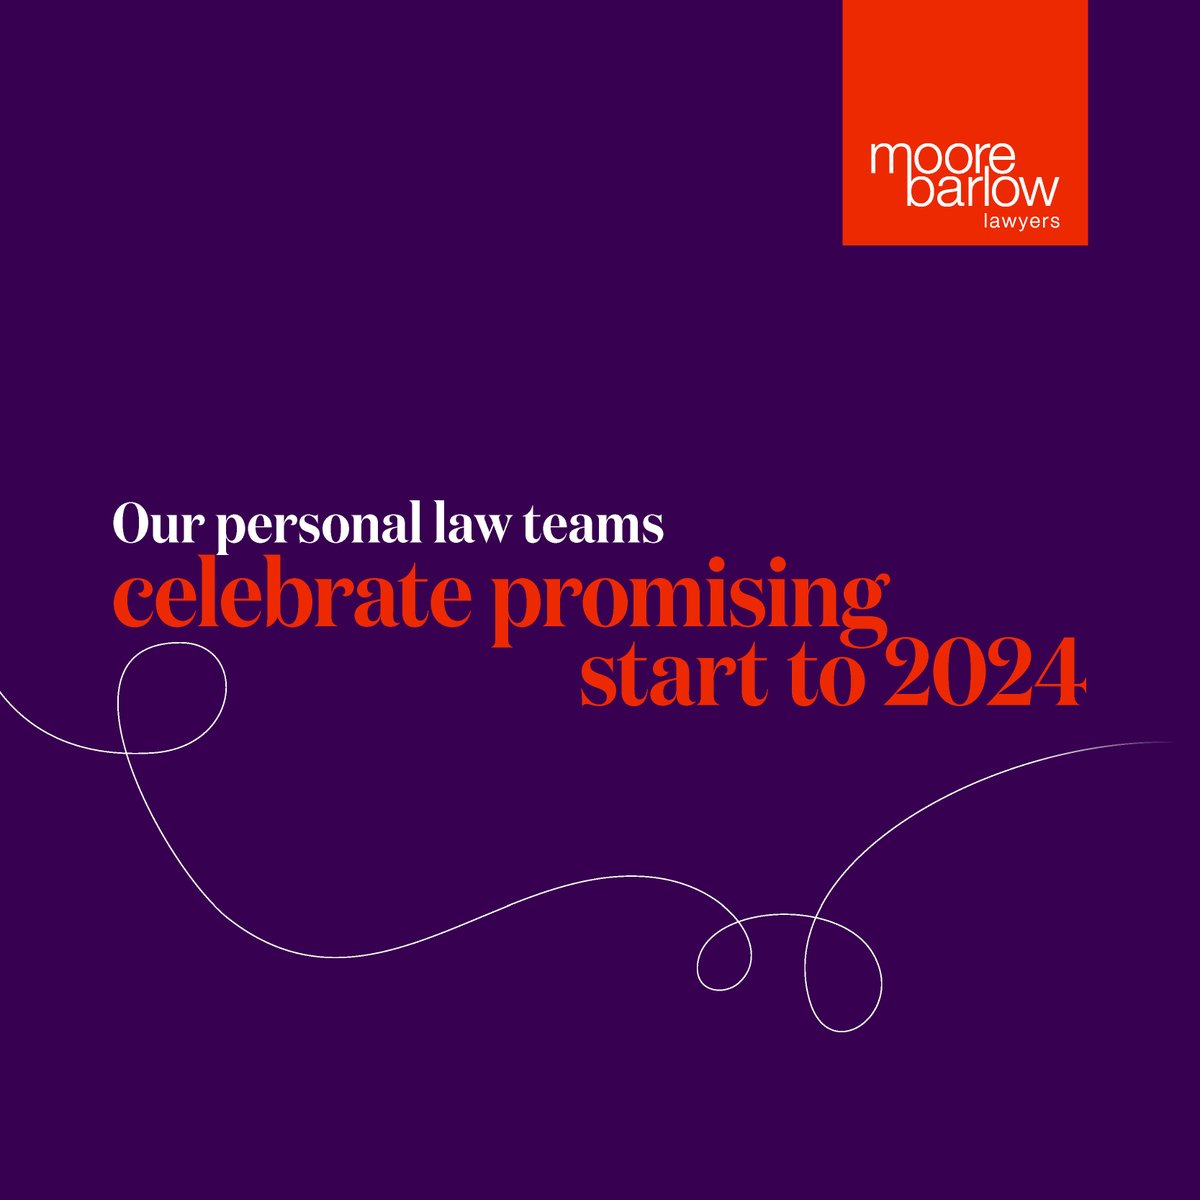 Who says it’s hard to find a good lawyer! Moore Barlow celebrates a promising start to Q1 in 2024. Find out more about our client support, major cases and other exciting news - hubs.ly/Q02v0NJ20 #MooreBarlow #PersonalLaw #PersonalandProfessional